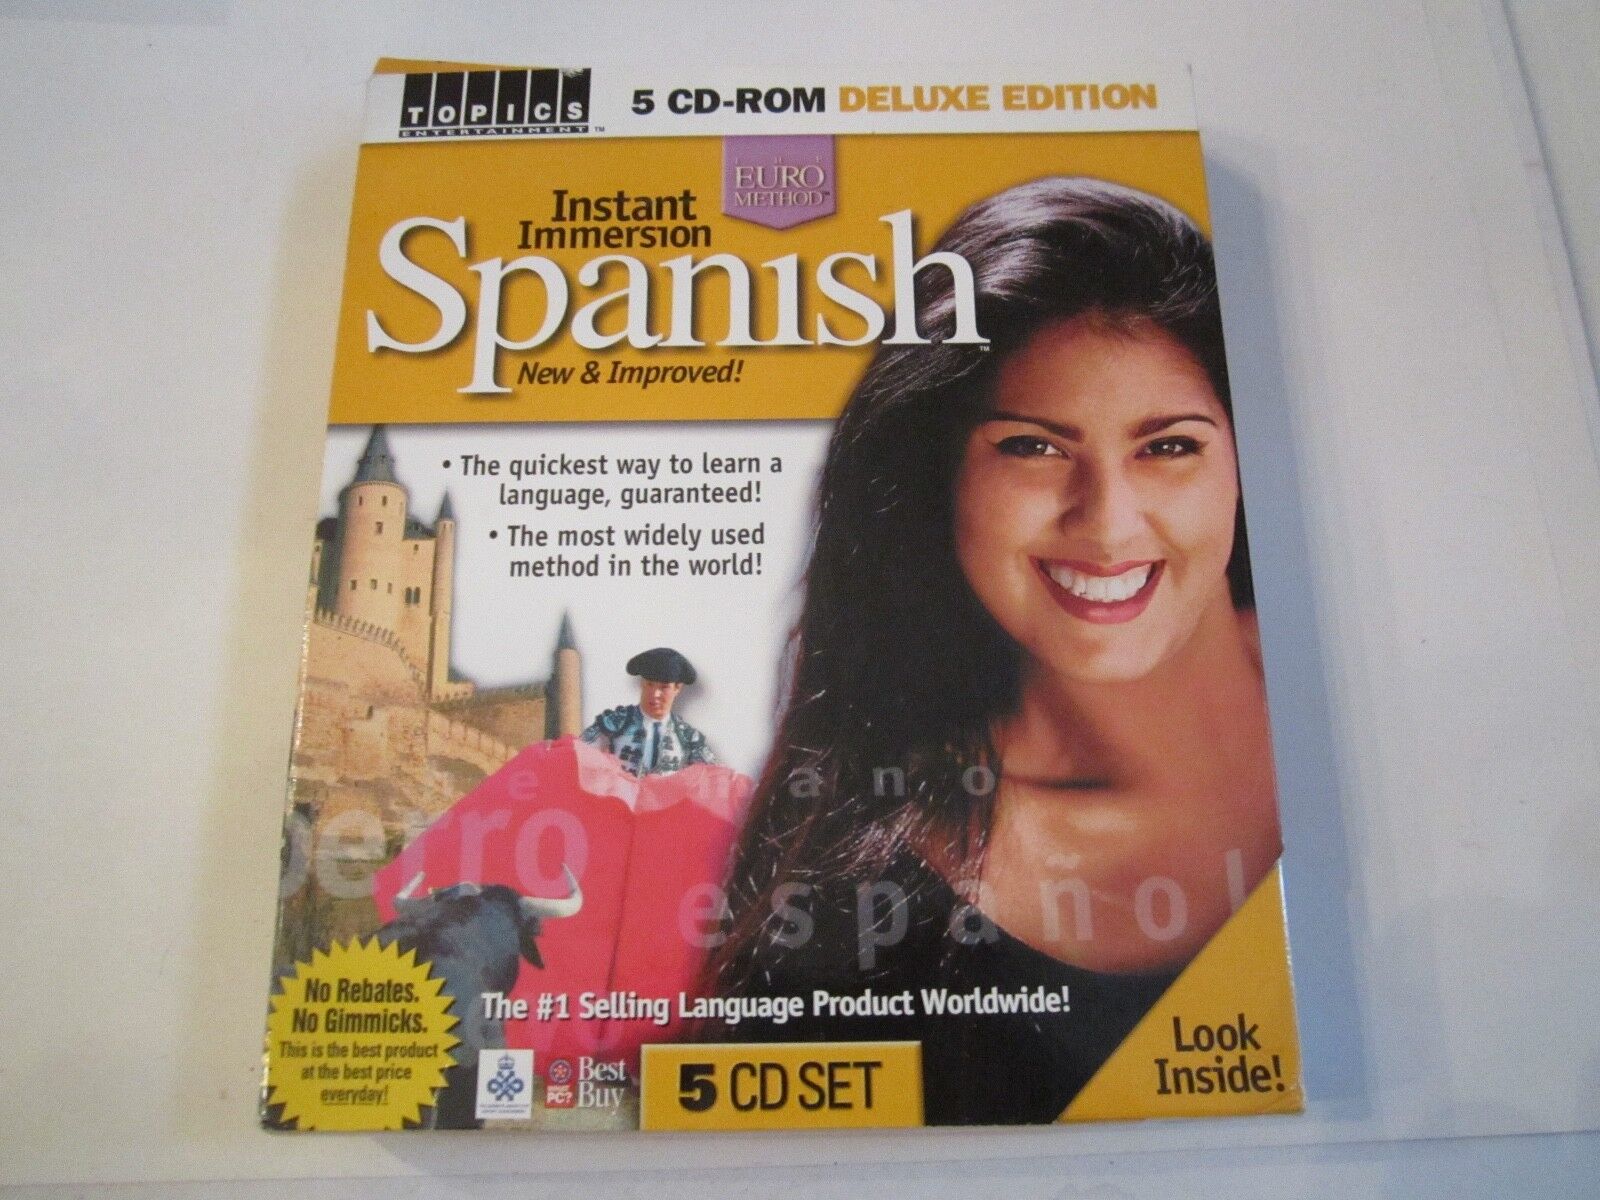 INSTANT SPANISH 5 CD-ROM DELUXE EDITION - THE EURO METHOD IN THE BOX - TUB RRRR